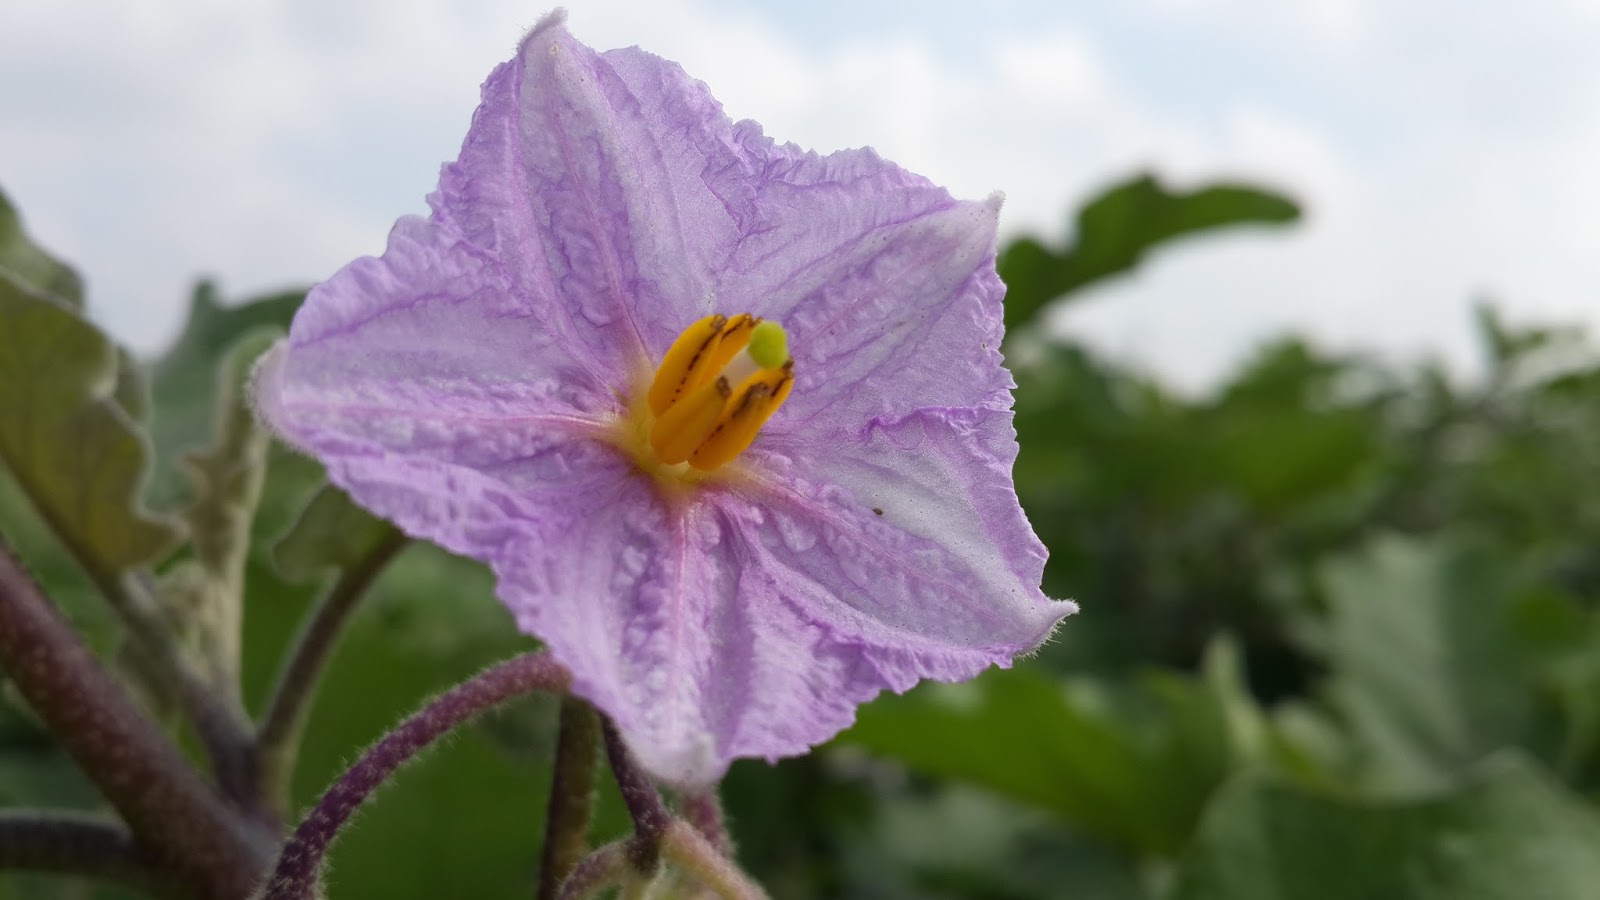 Global Pictures Gallery: brinjal plant and flower images